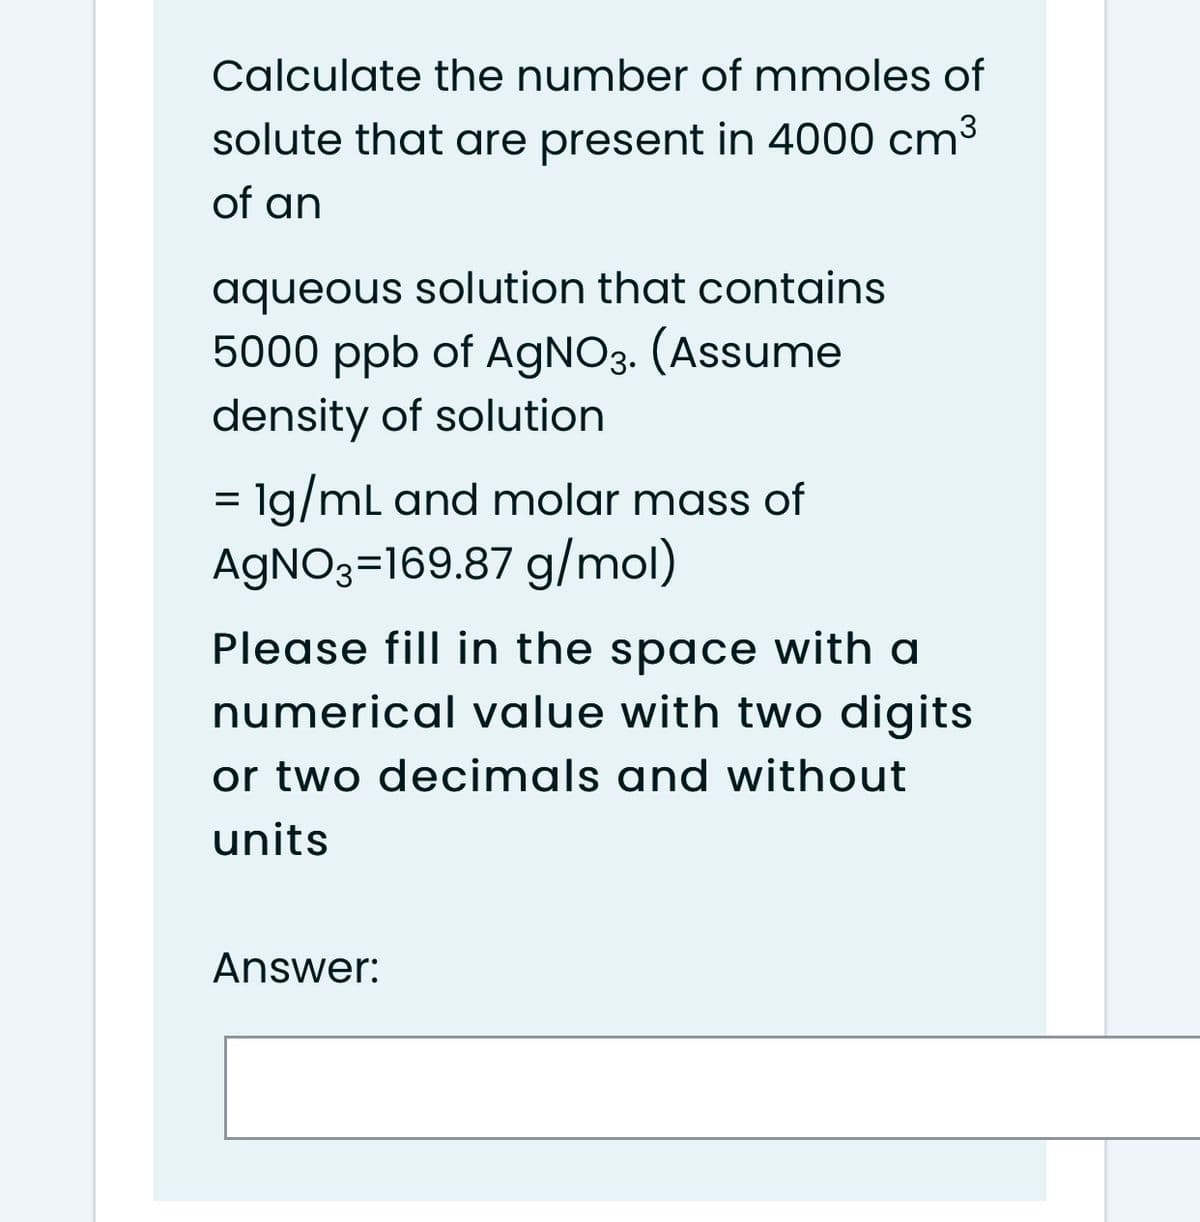 Calculate the number of mmoles of
solute that are present in 4000 cm3
of an
aqueous solution that contains
5000 ppb of AgNO3. (Assume
density of solution
= lg/ml and molar mass of
AGNO3=169.87 g/mol)
Please fill in the space with a
numerical value with two digits
or two decimals and without
units
Answer:
